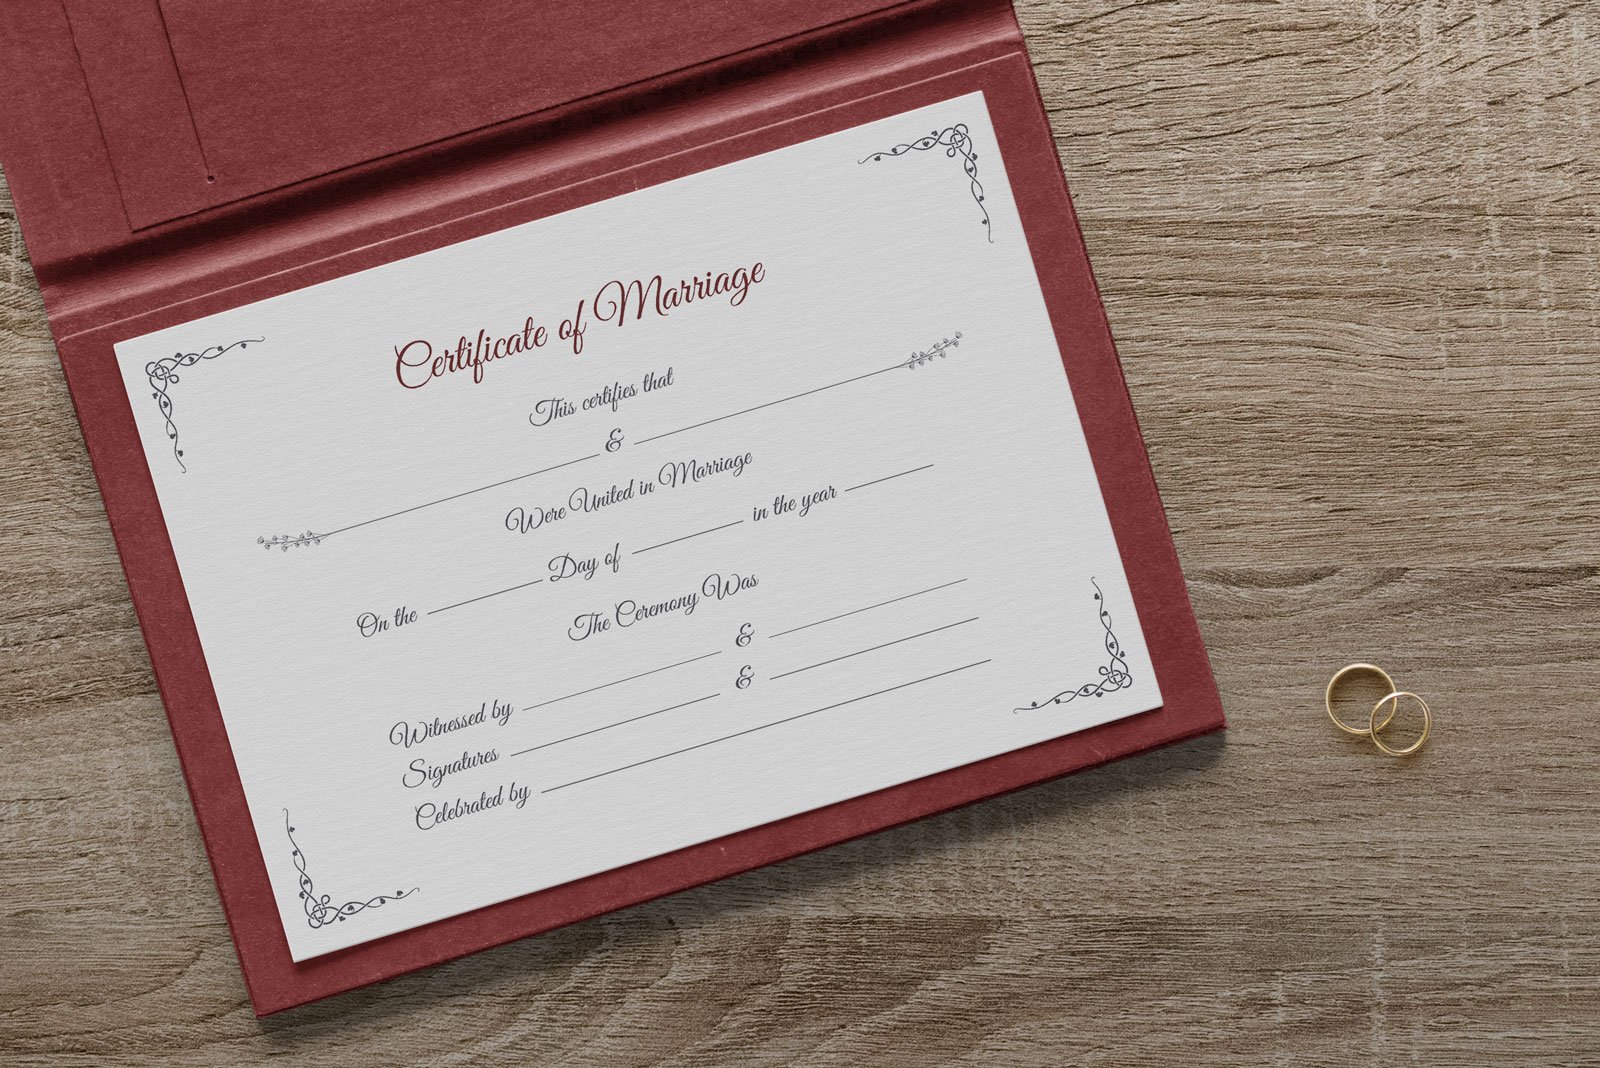 Free Certificate of Marriage Template in Ai & Mockup PSD - Designbolts Intended For Certificate Of Marriage Template